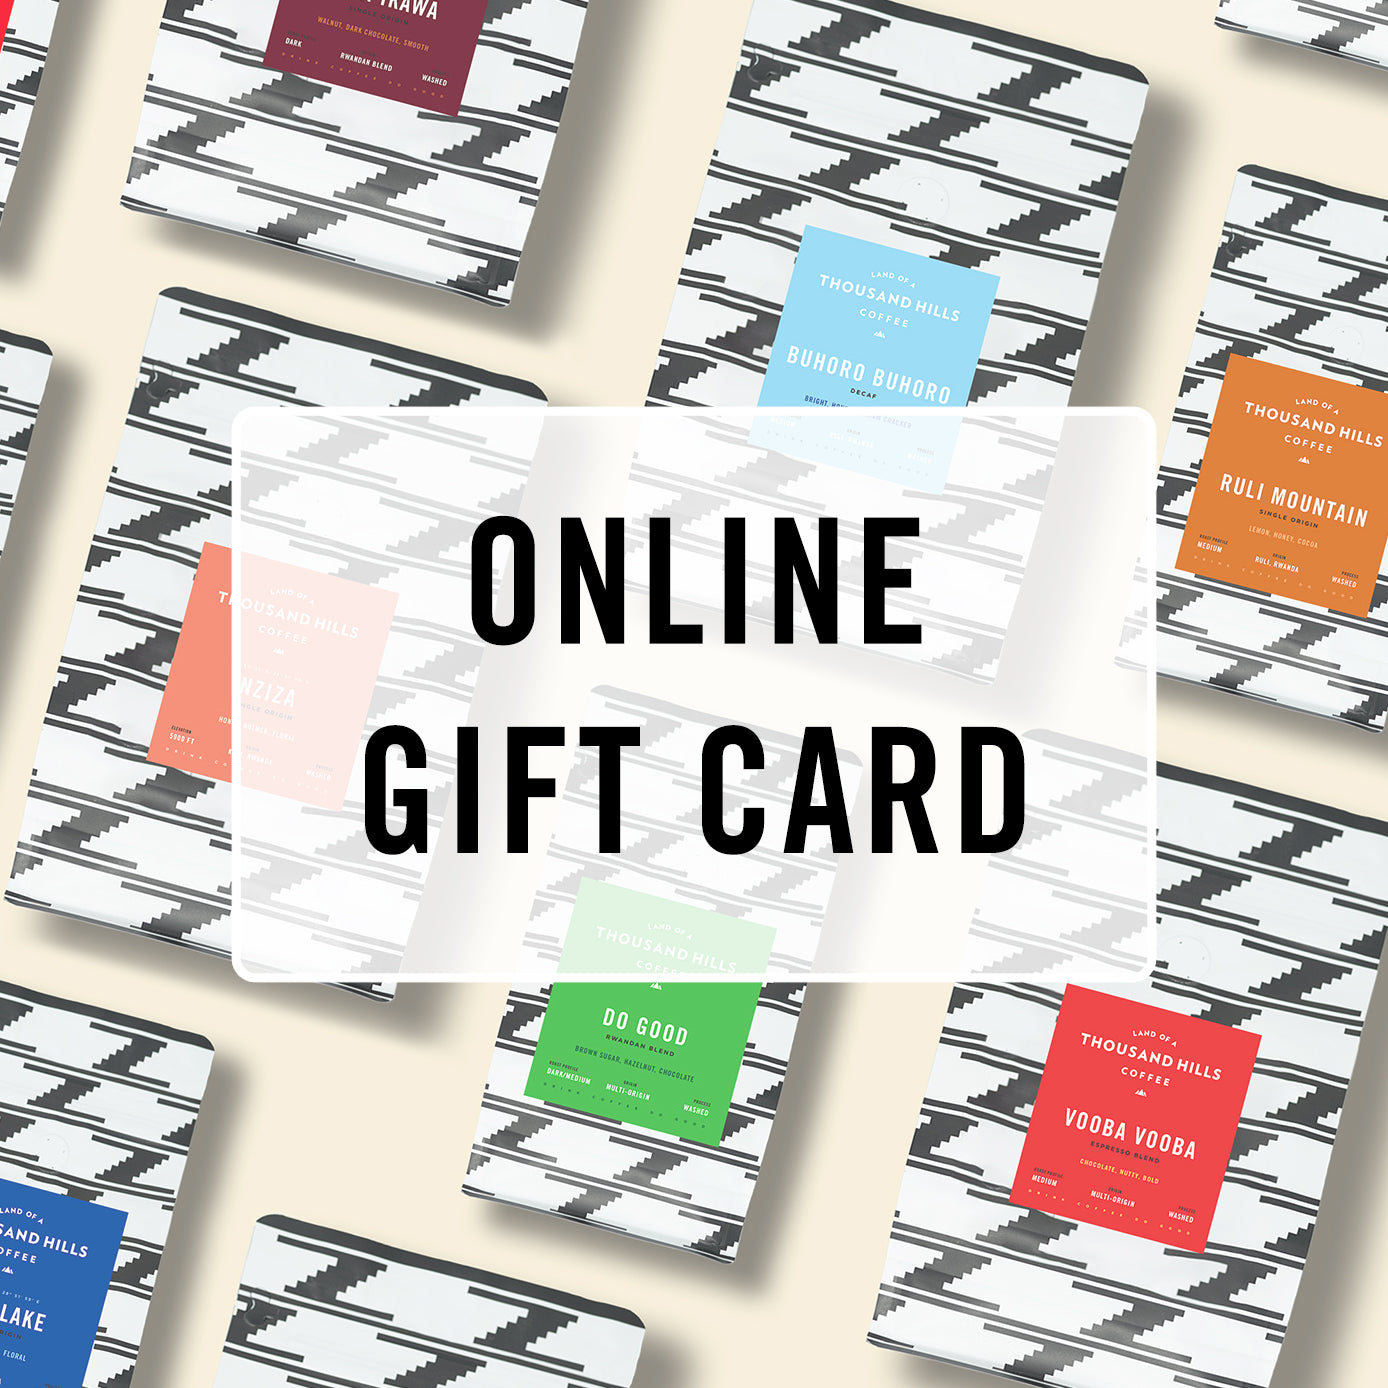 Online Gift Card - Land of a Thousand Hills Coffee